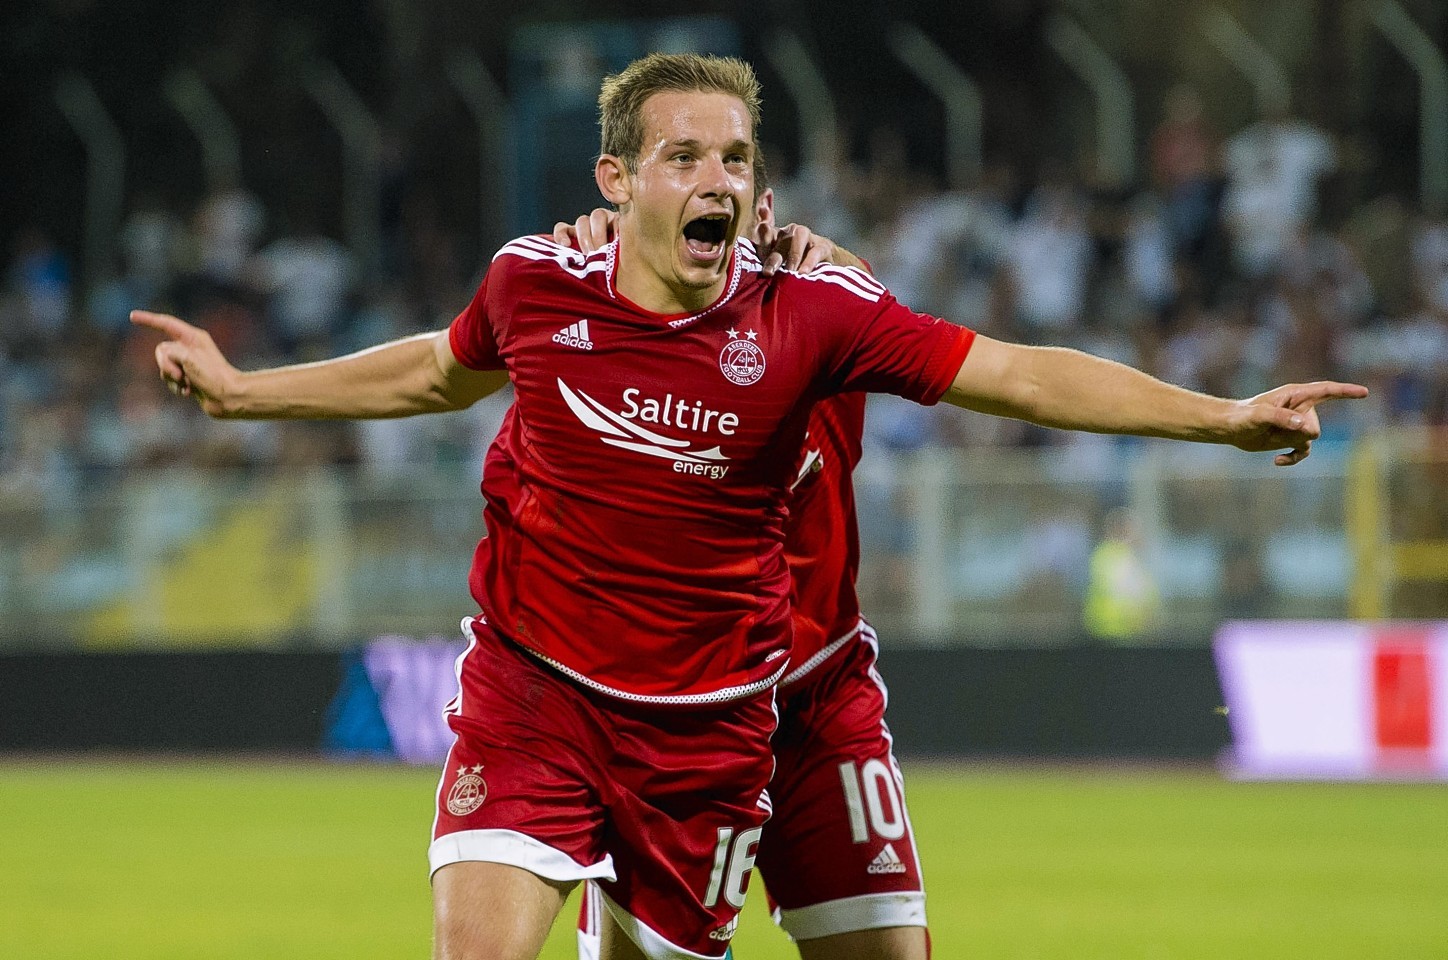 Peter Pawlett has signed a pre-contract agreement with MK Dons.